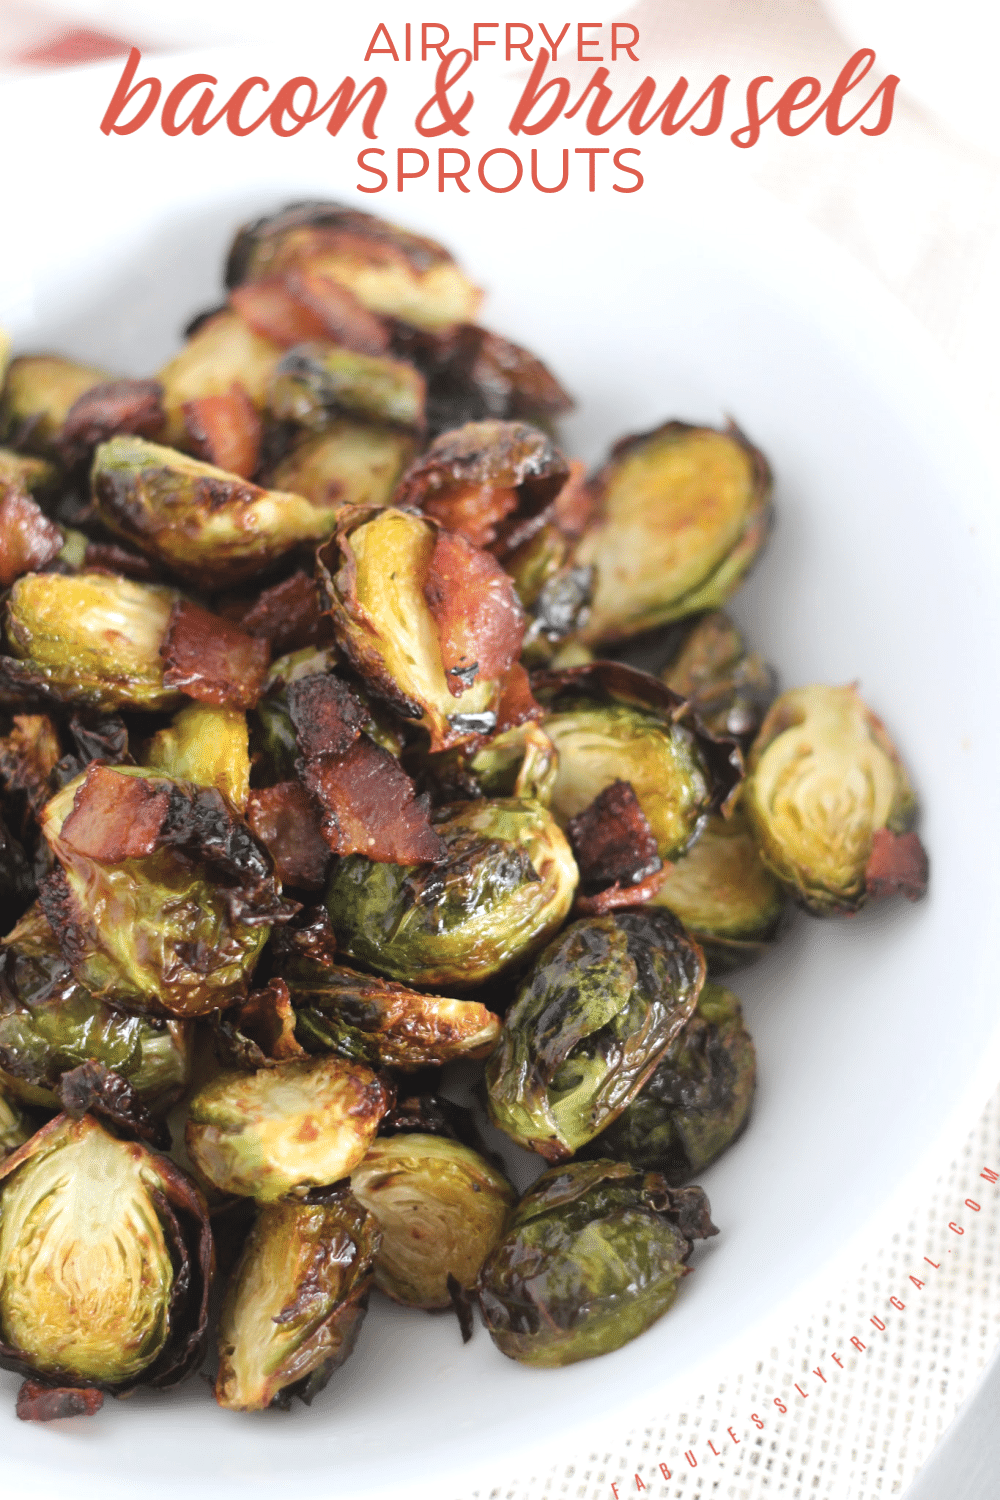 Air fryer brussels sprouts with bacon